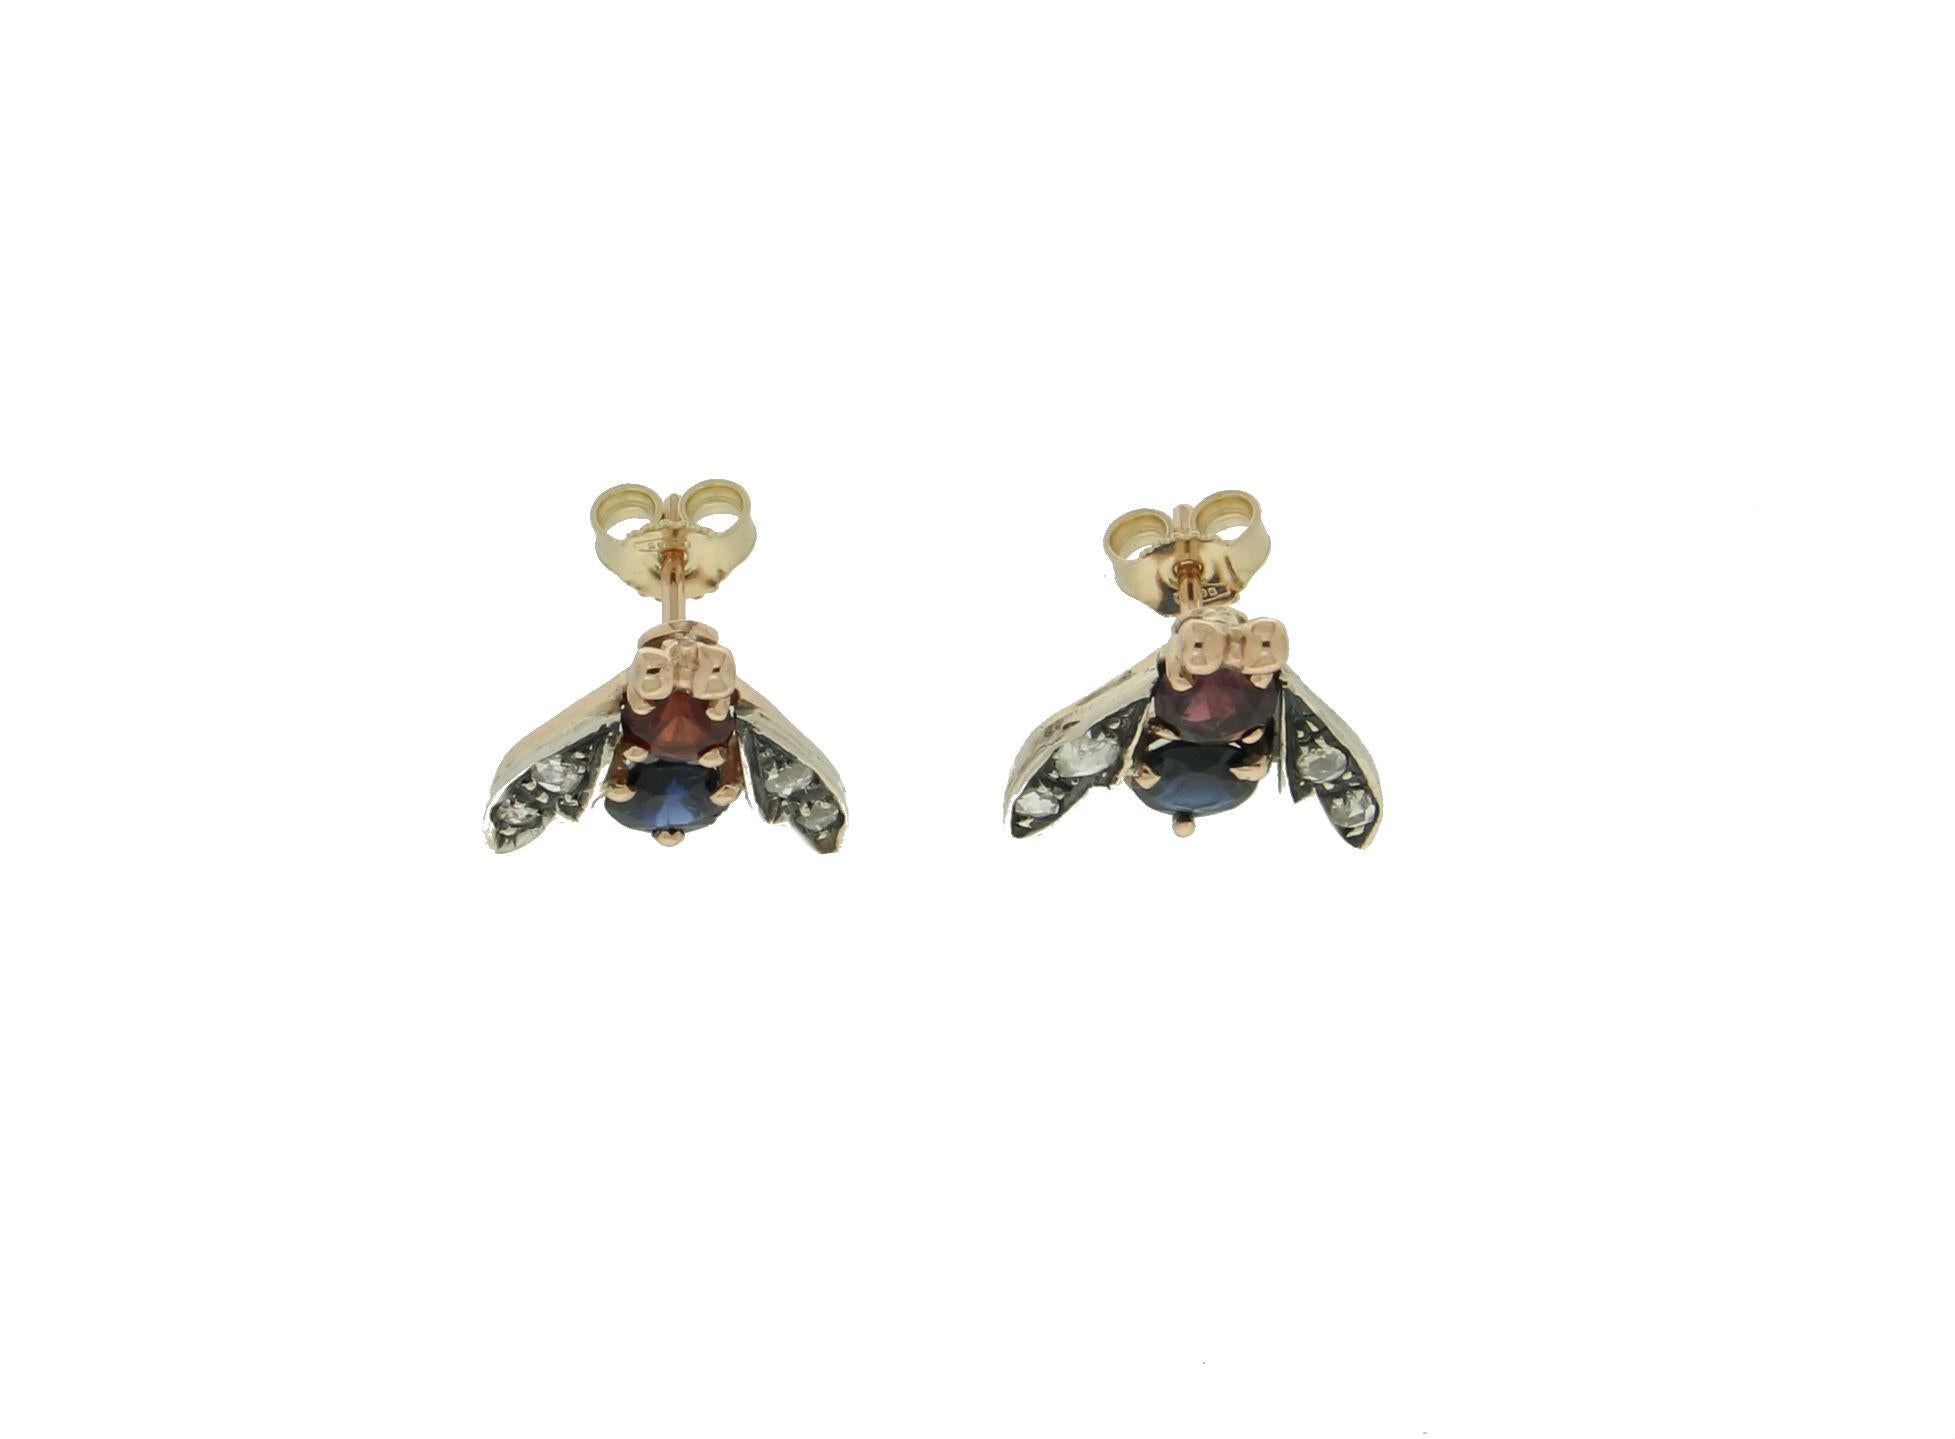 Beautiful earrings in the shape of small flies in 14 karat gold and 800 thousandths silver made with precision and entirely by hand by our skilled artisans.
The flies have a particular meaning in the culture of the jewel, the legend tells that they